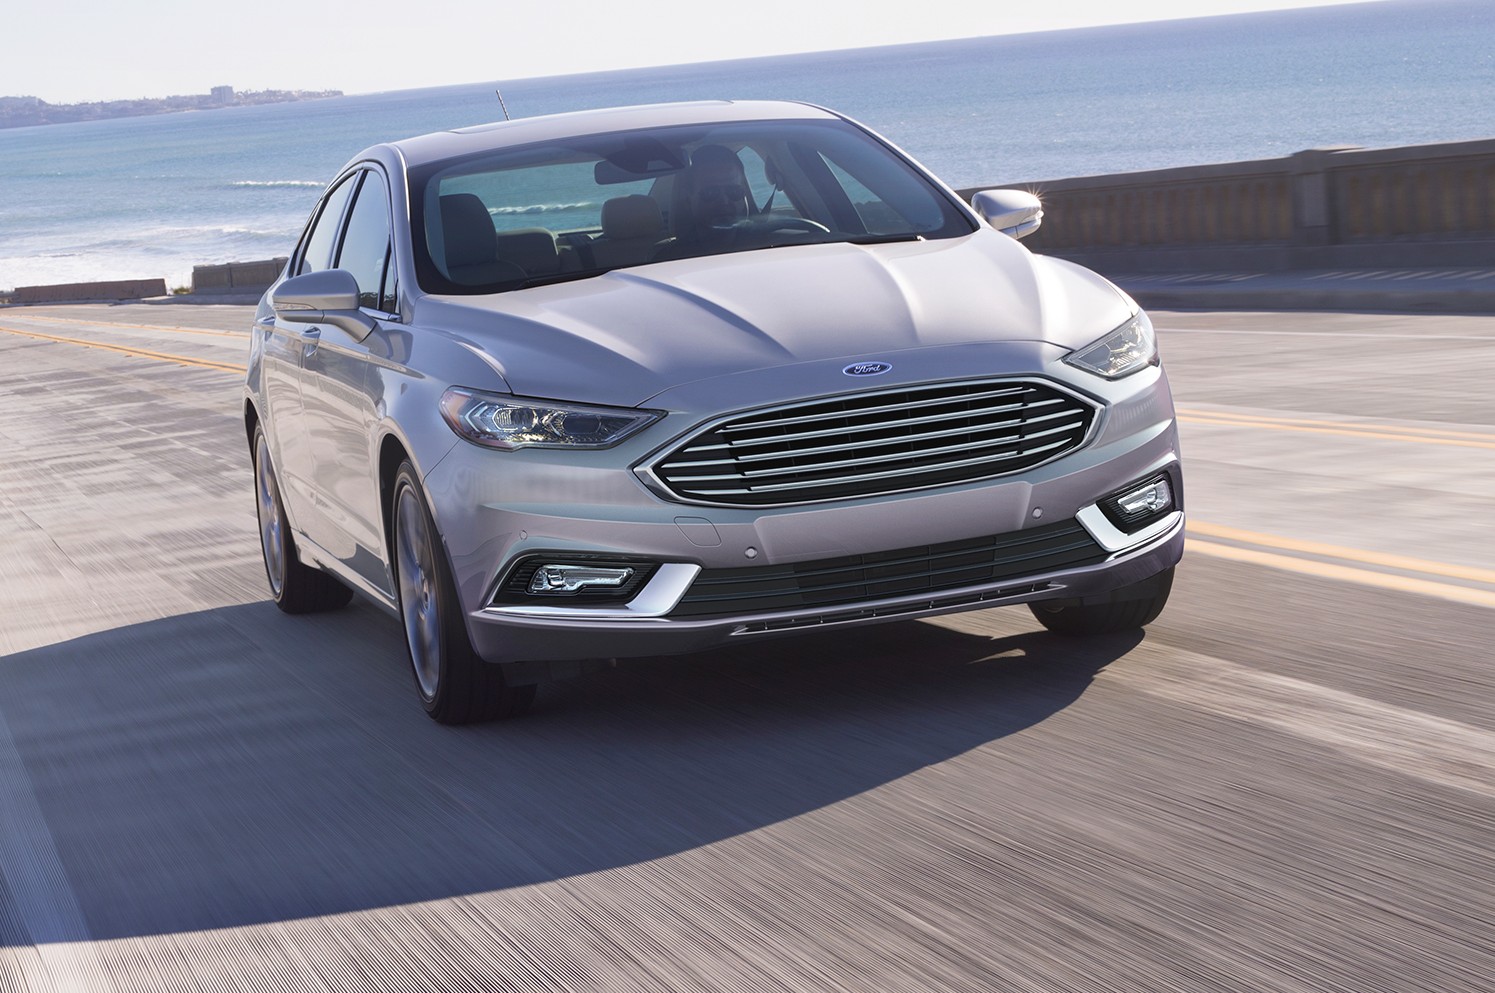 2017 Ford Fusion First Drive Review: More Than Just a Pretty Face?